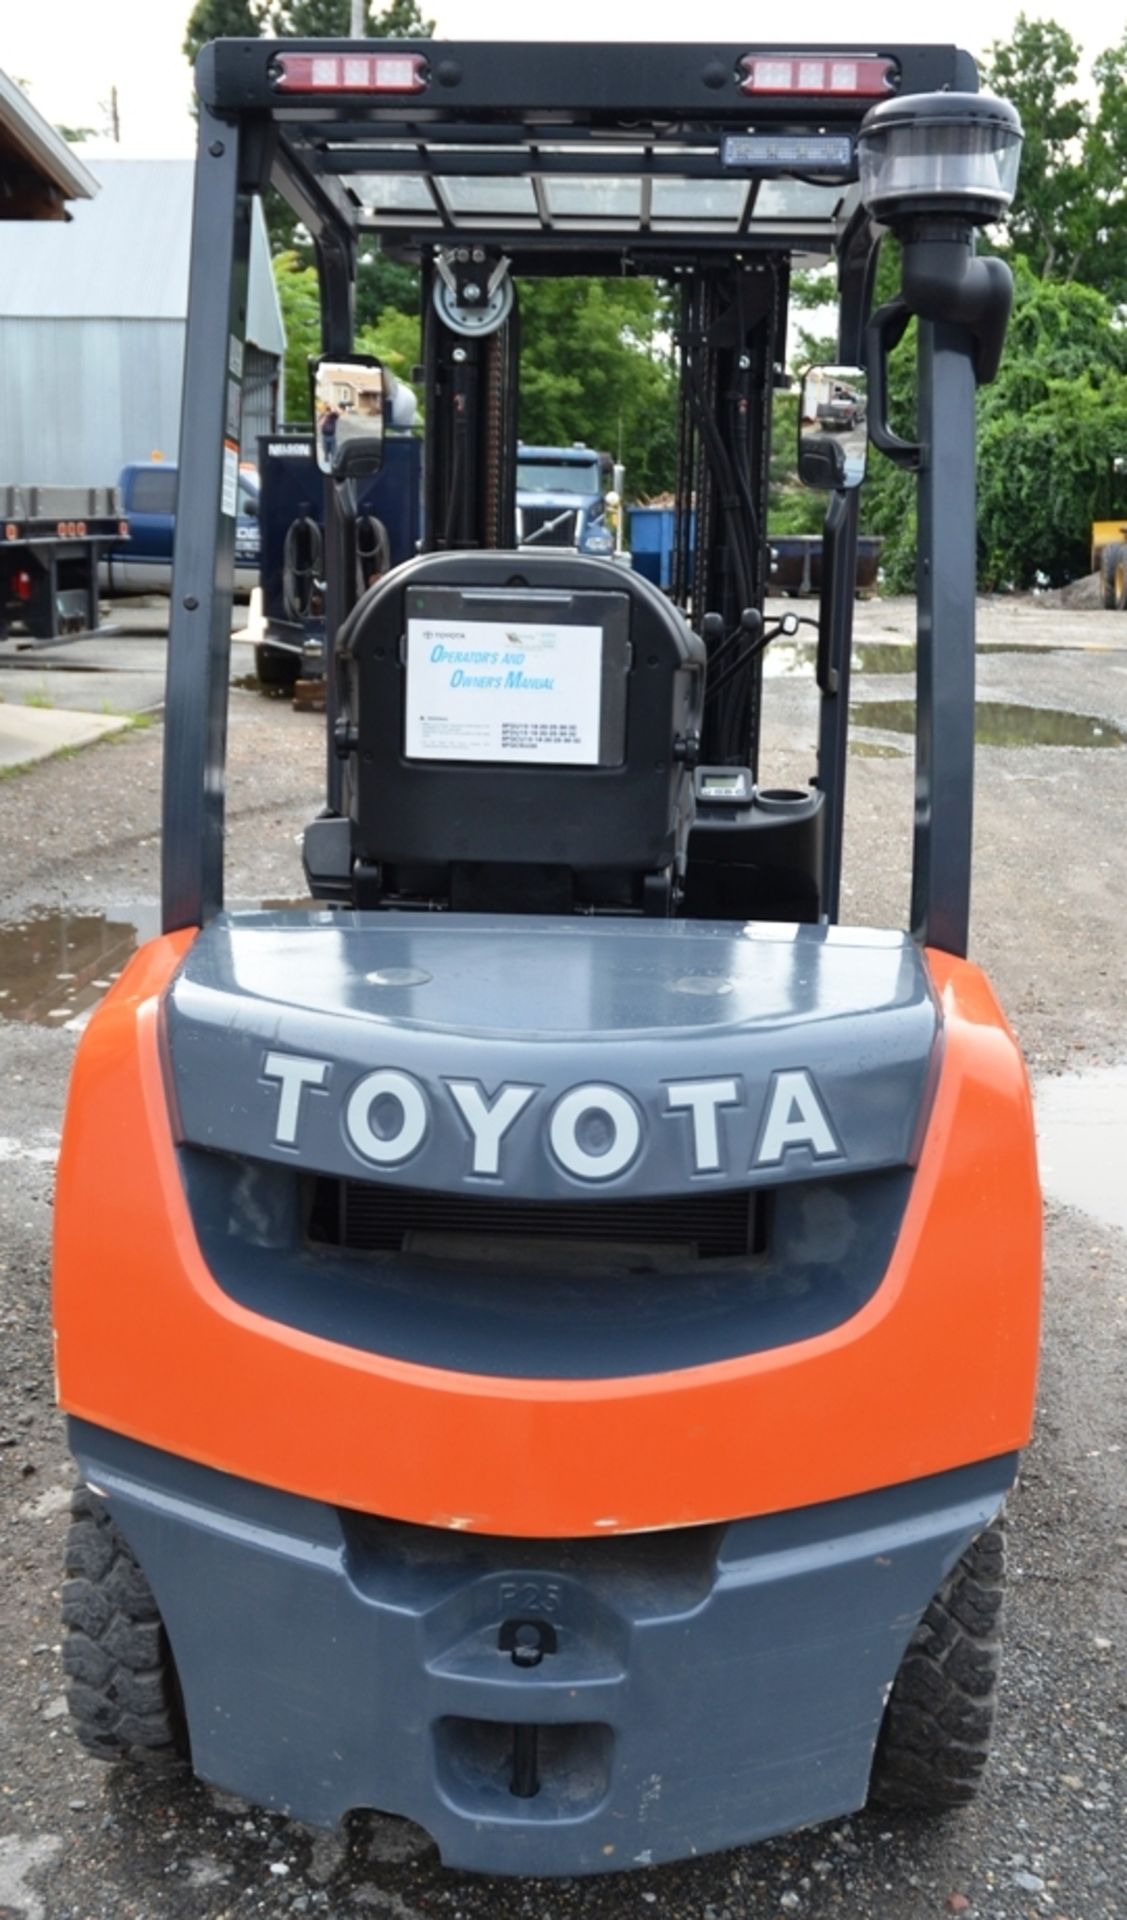 2016 Toyota Forklift, Diesel Gas Powered, 5000 lb. Capacity, Side Shifter - ONLY 115 Hours - Image 3 of 5